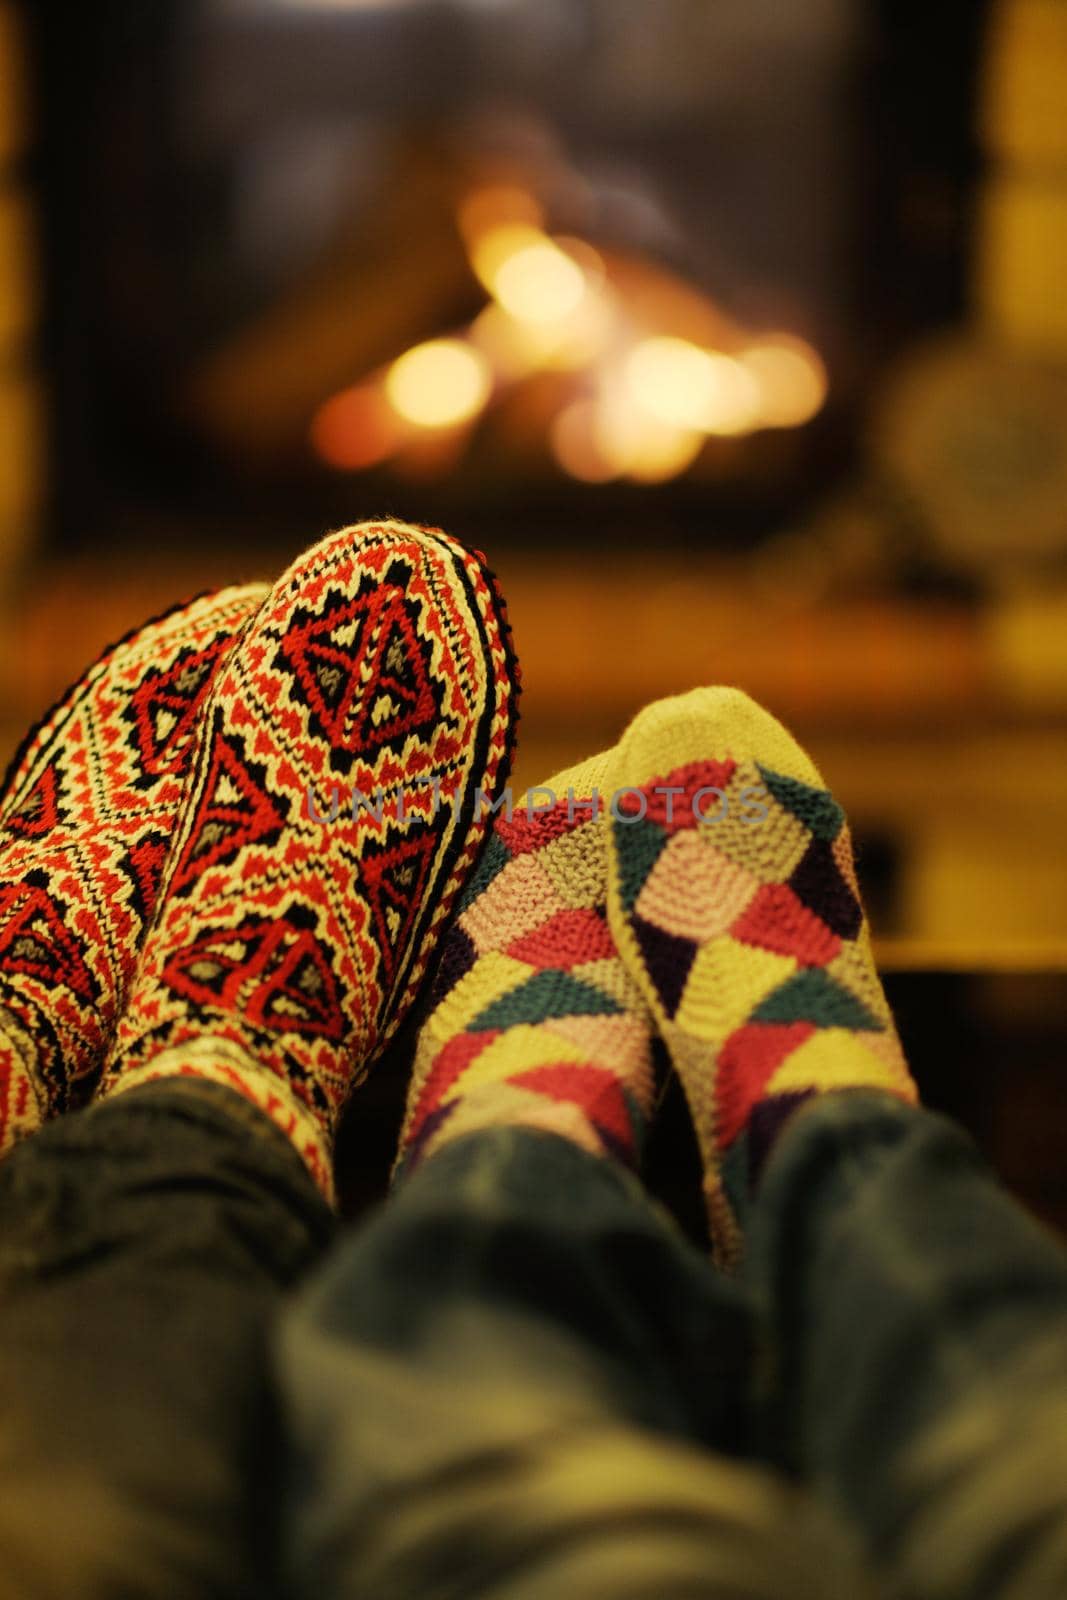 Young romantic couple relax on sofa in front of fireplace at home by dotshock